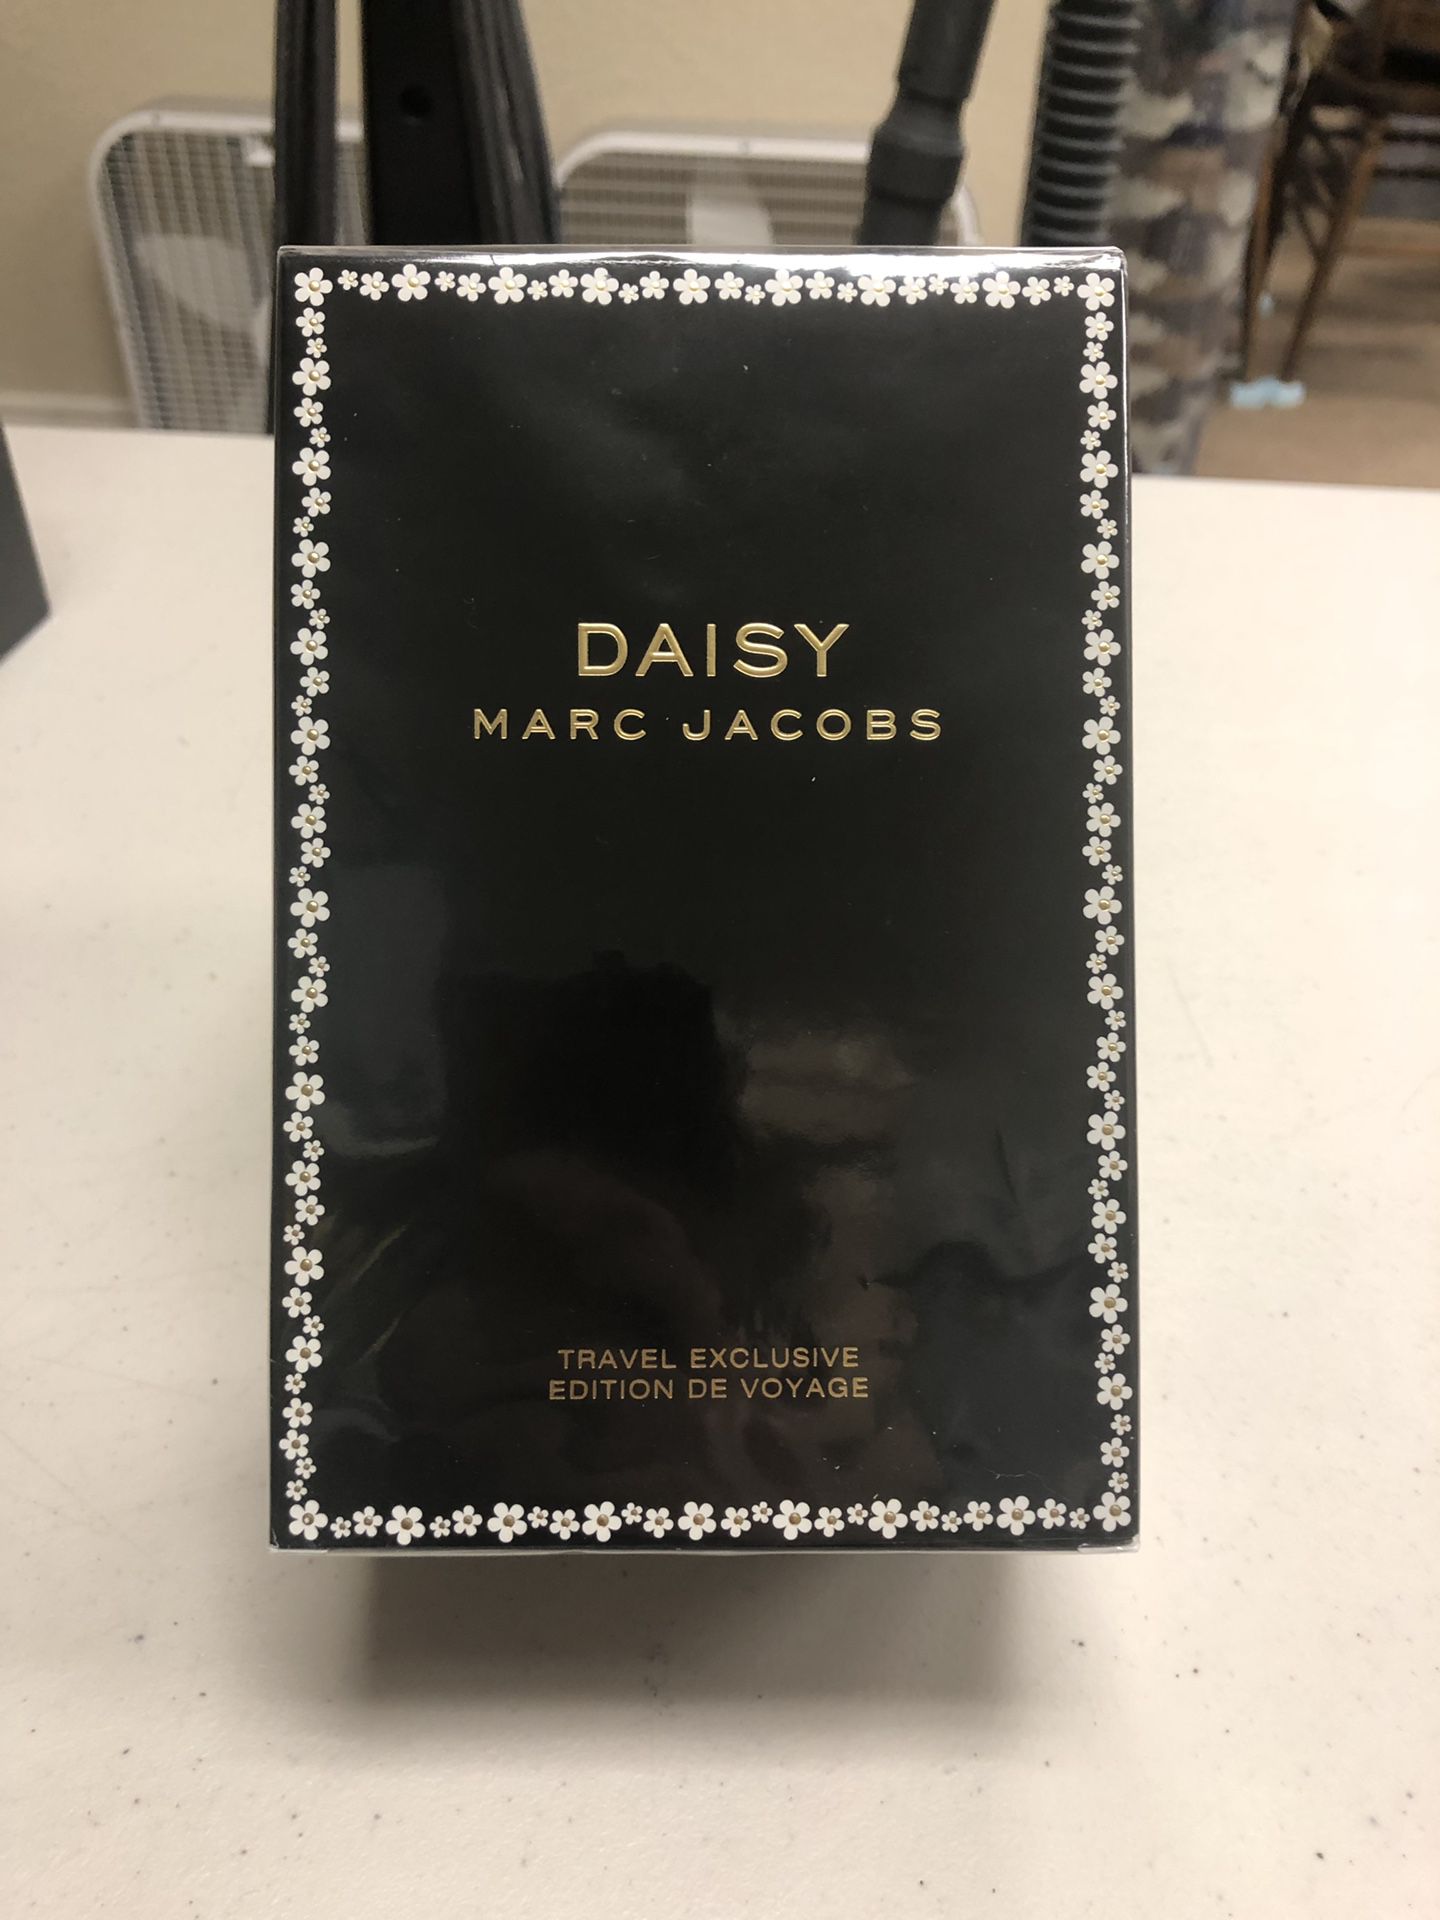 Daisy Travel Perfume and Moisturizer by Marc Jacobs | BRAND NEW SEALED IN BOX